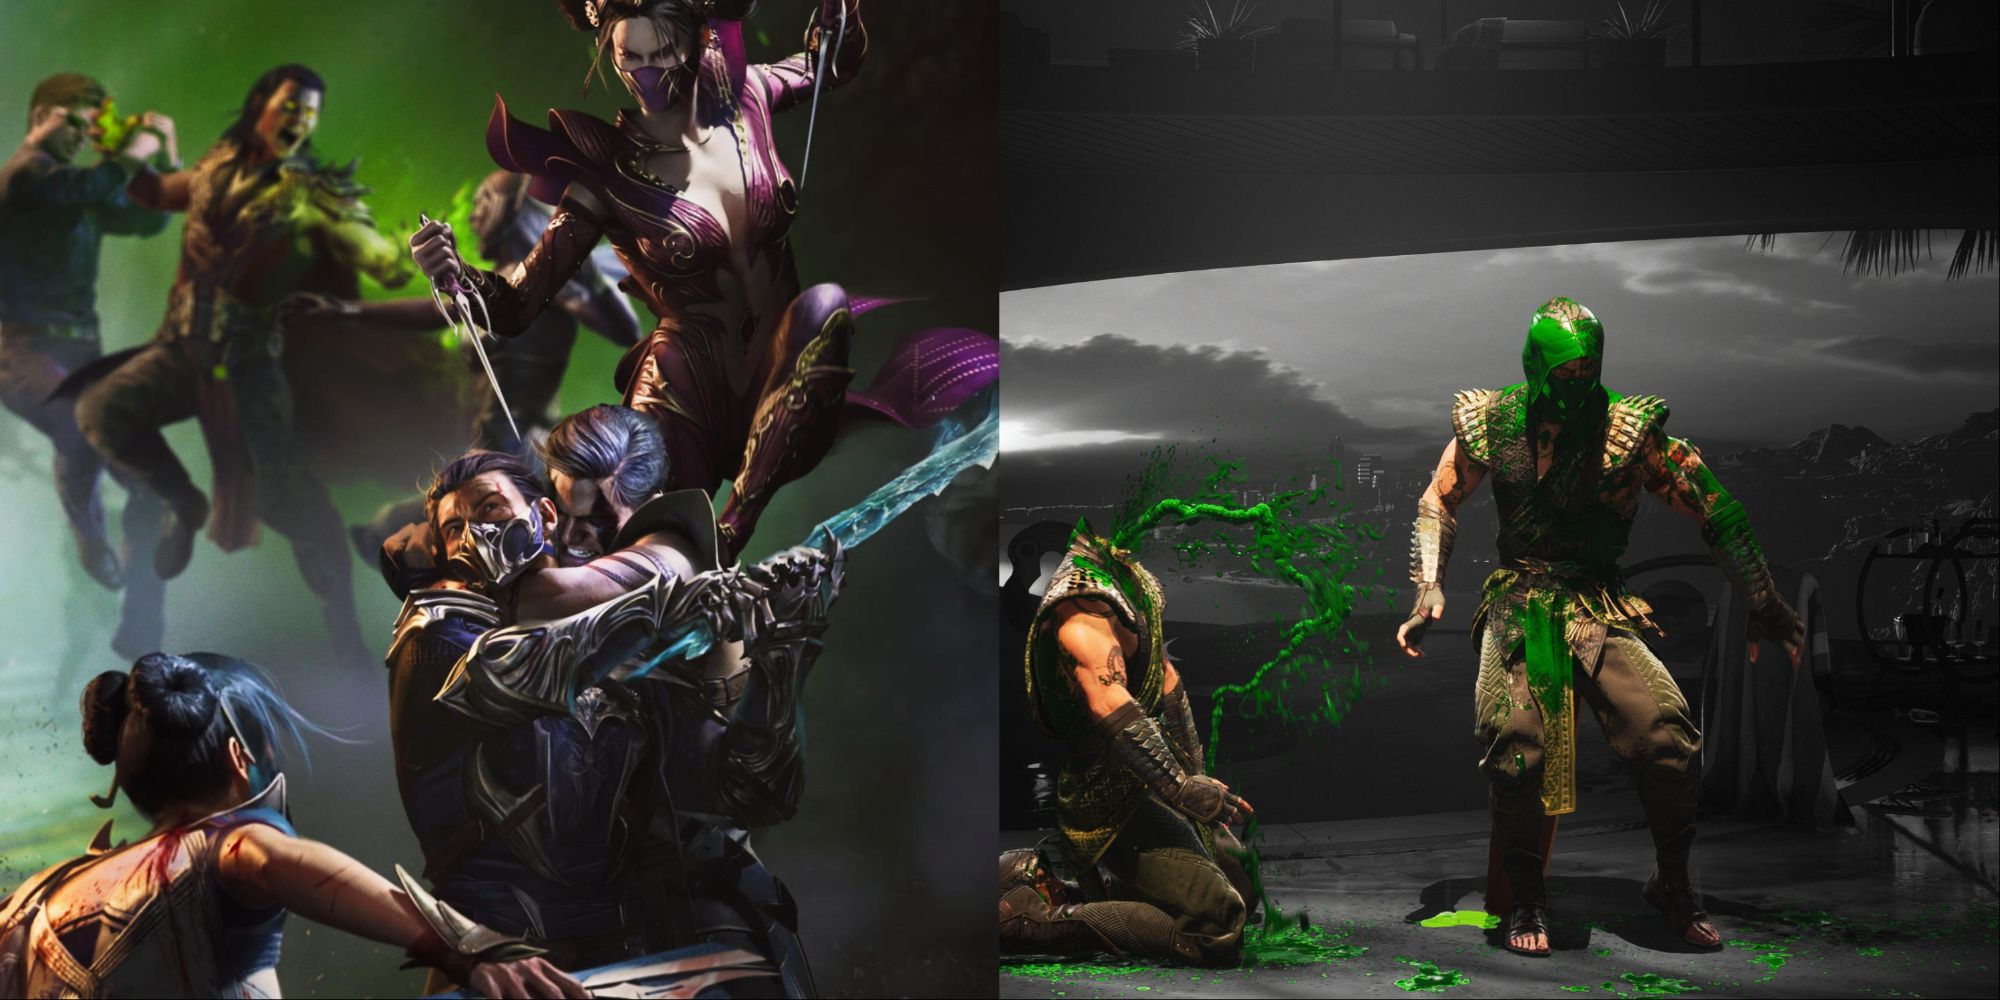 A collage showing a group of characters fighting on the left and Reptile performing a Brutality on the right.